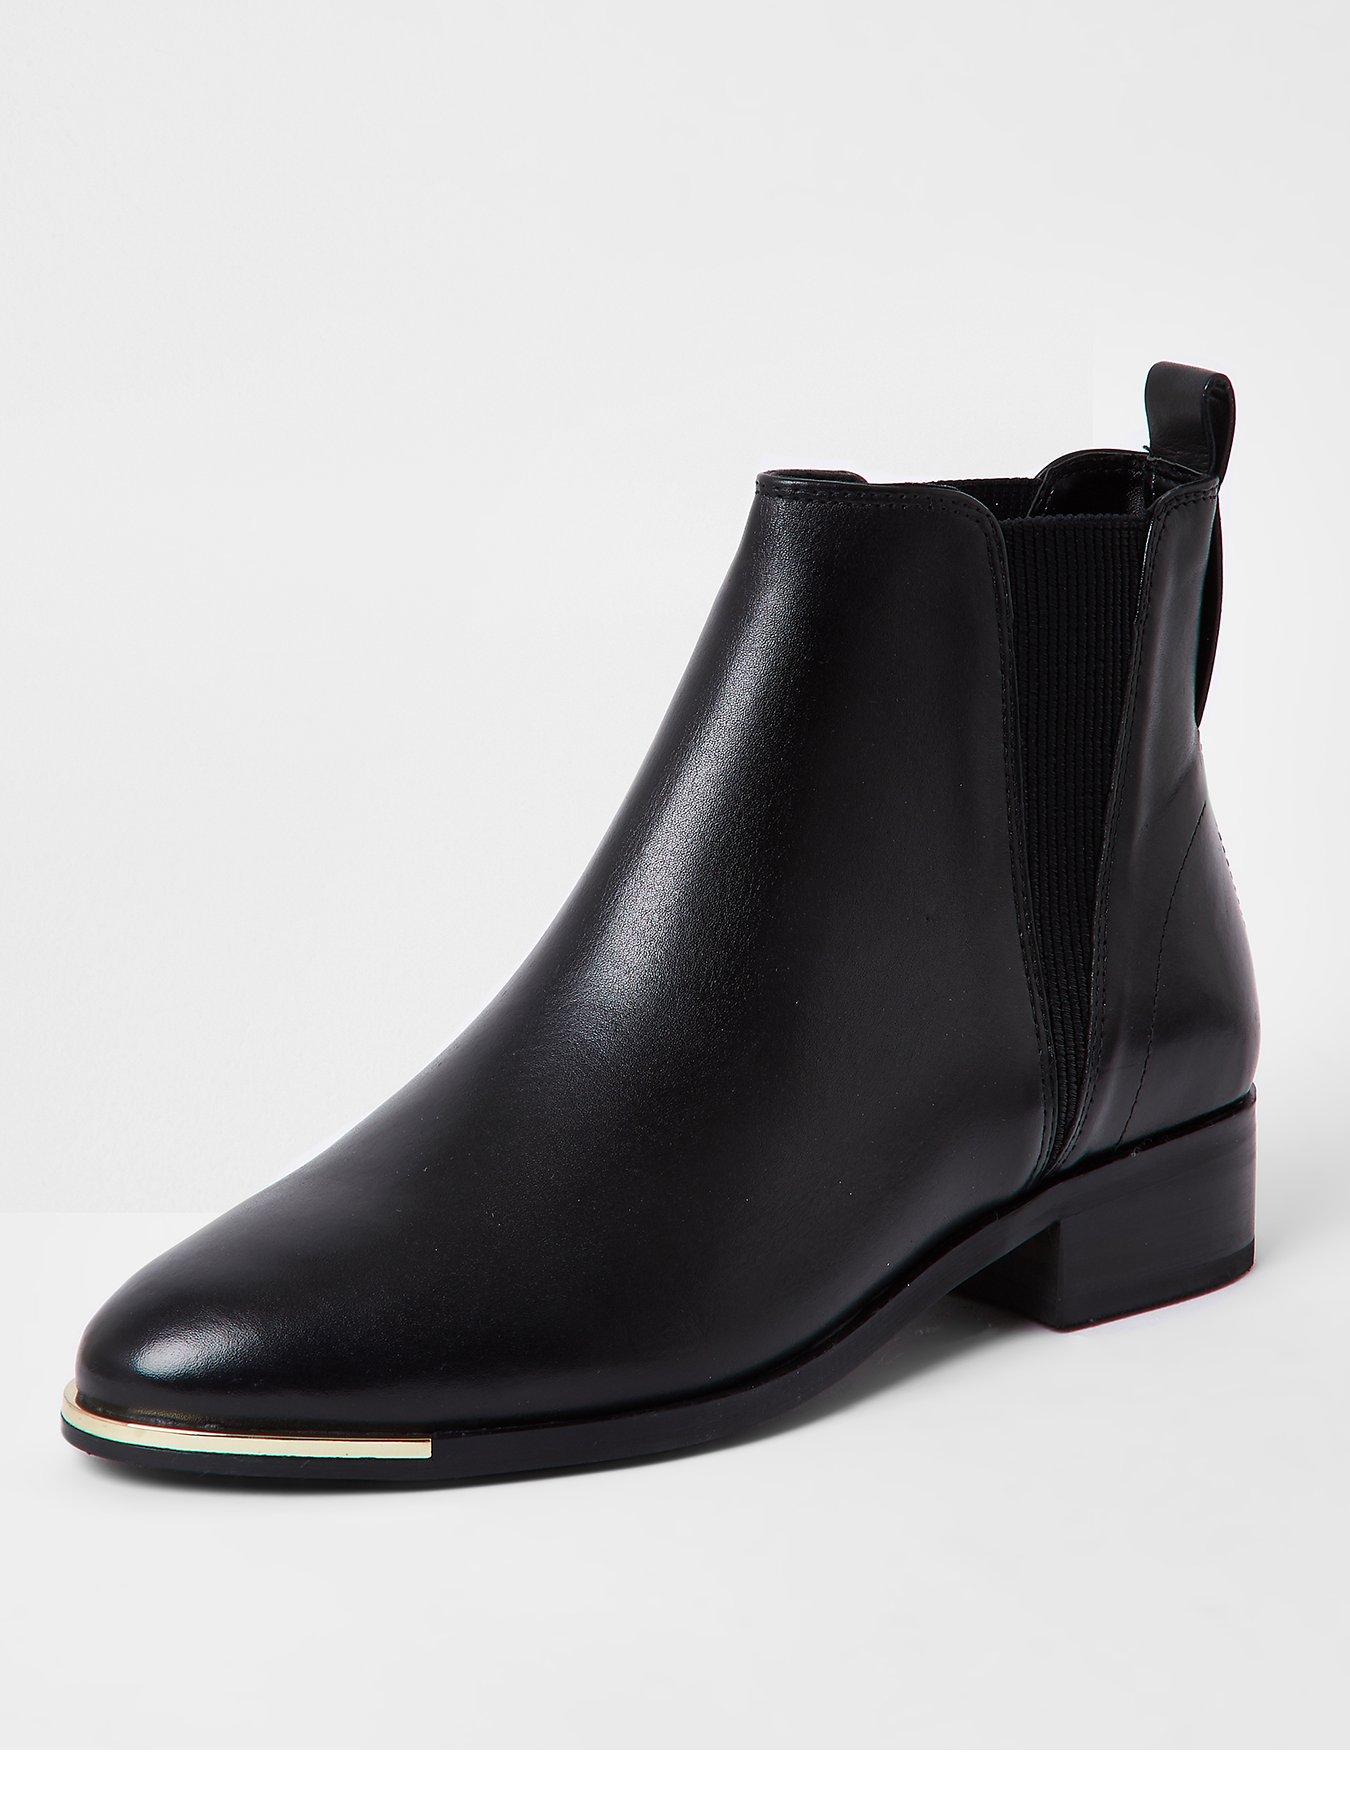 river island boots women's shoes